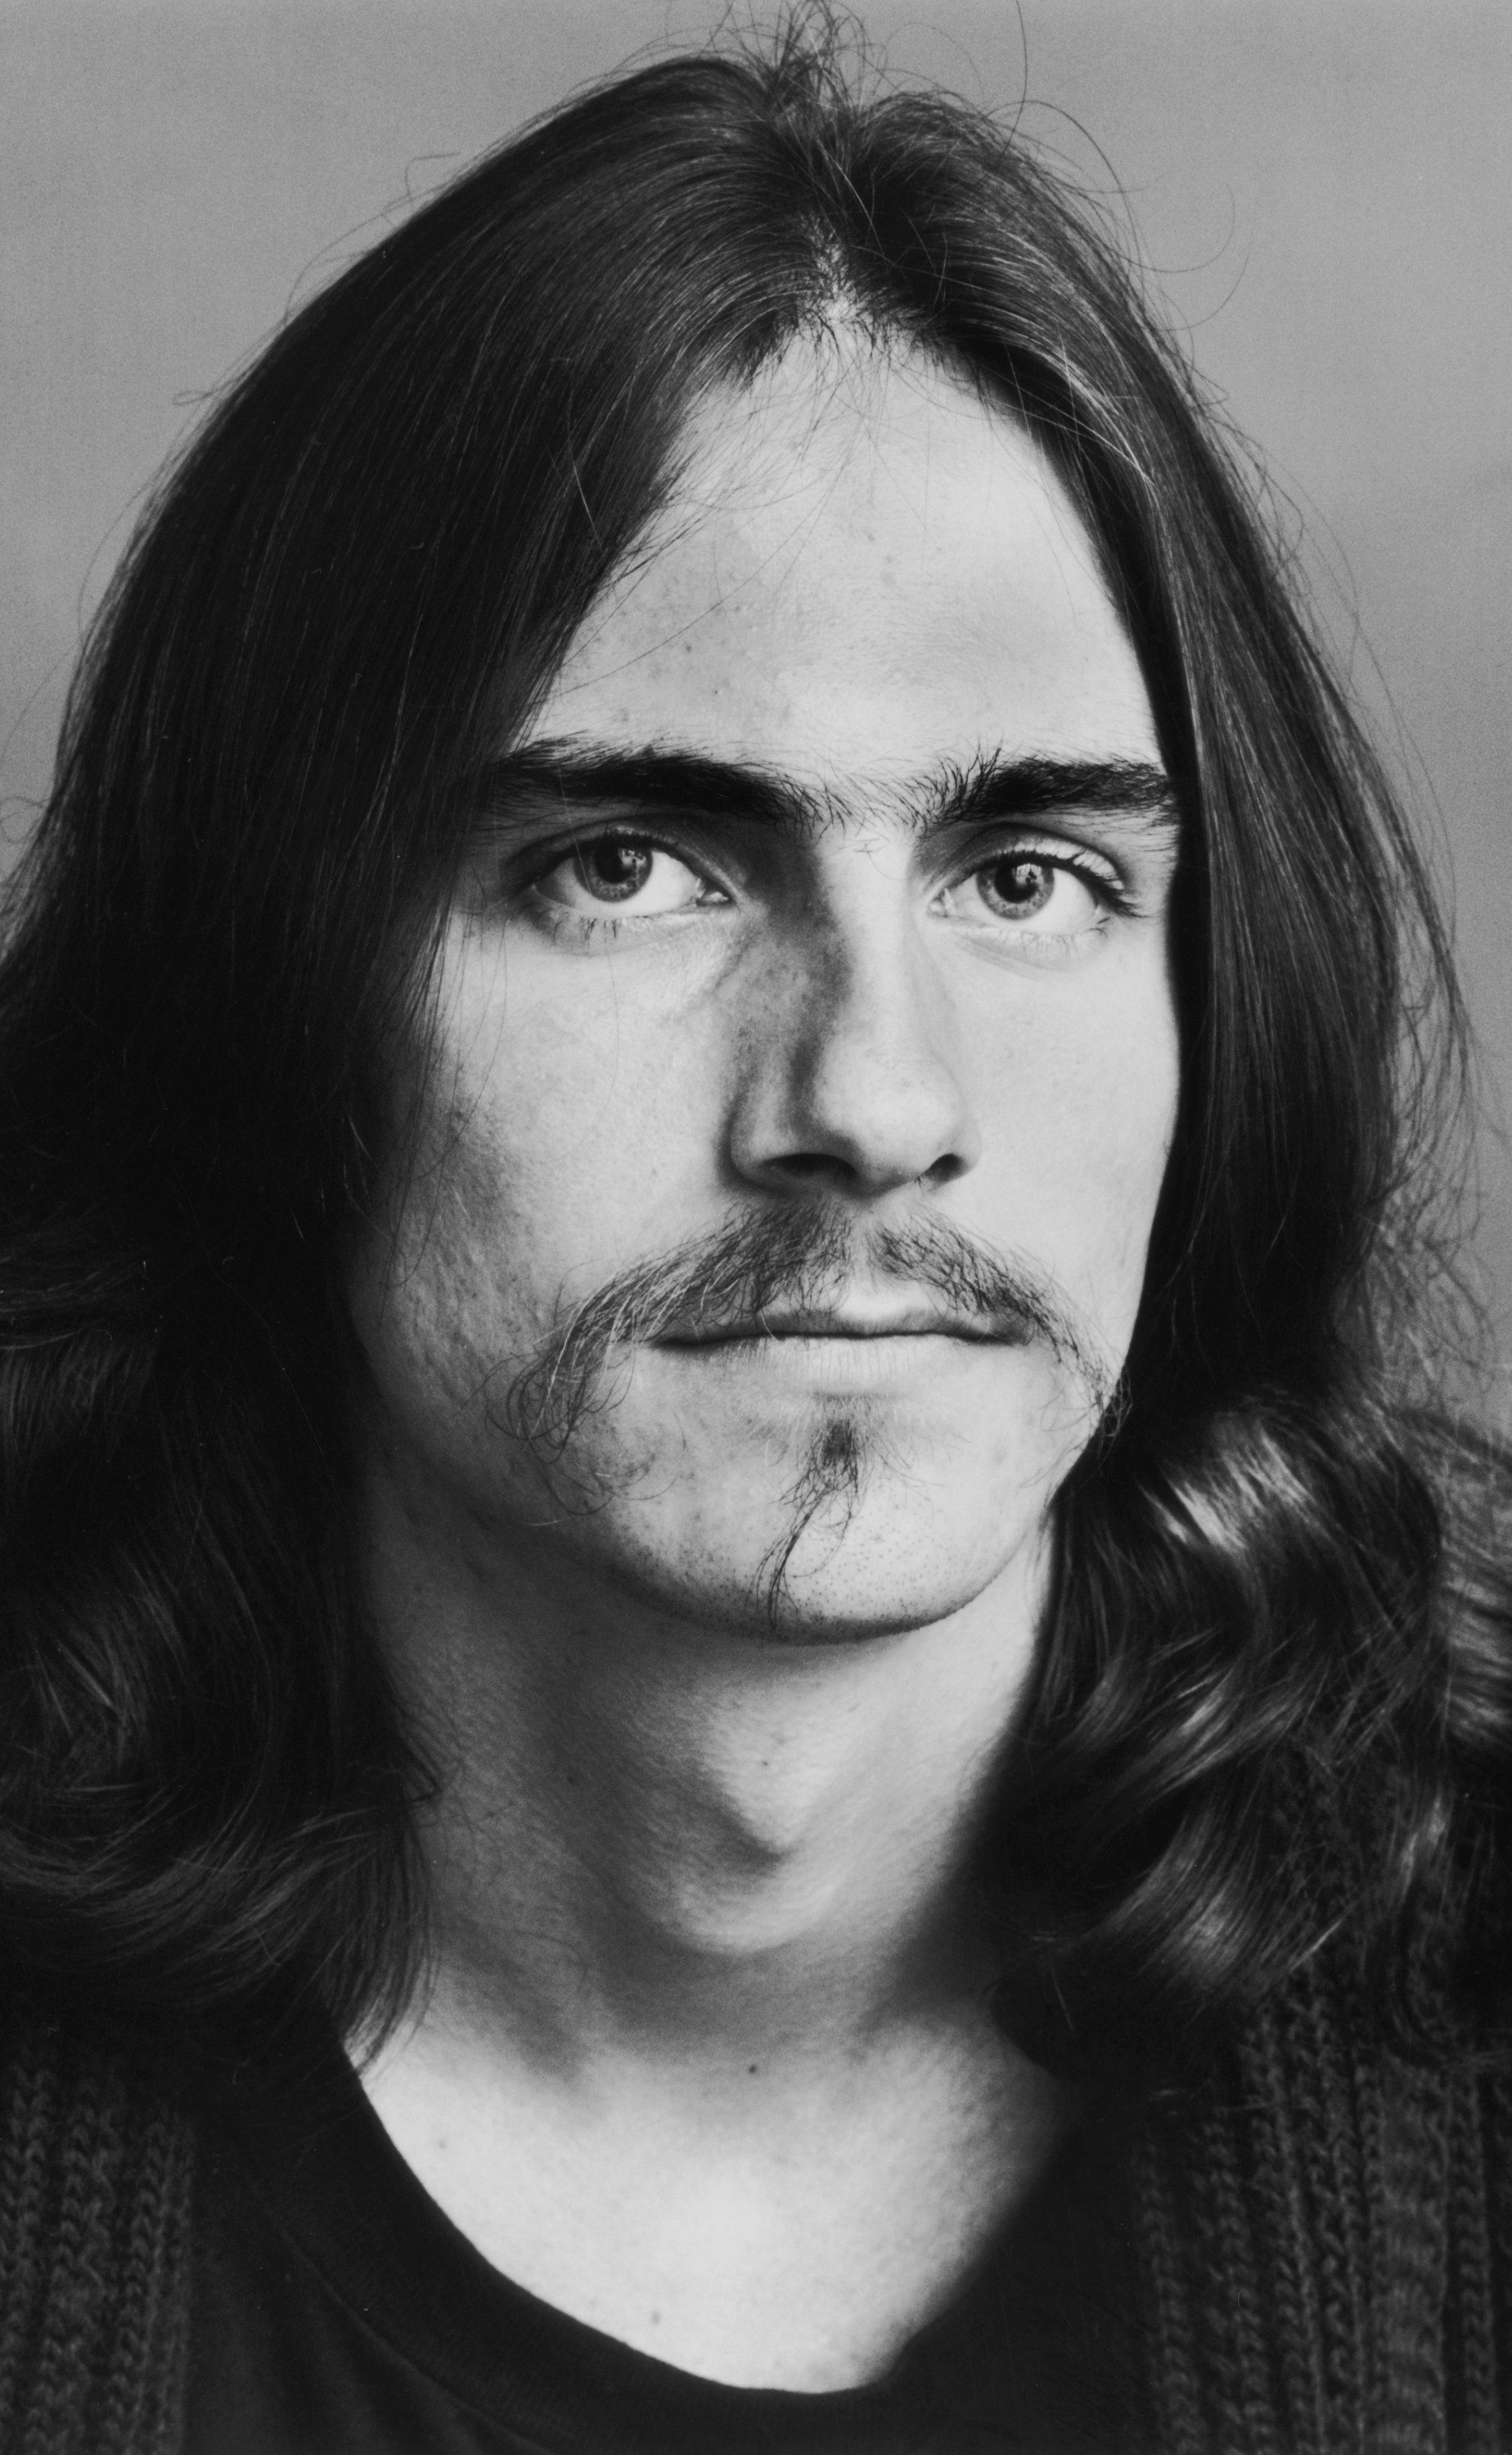 Taylor posing for a portrait in 1969